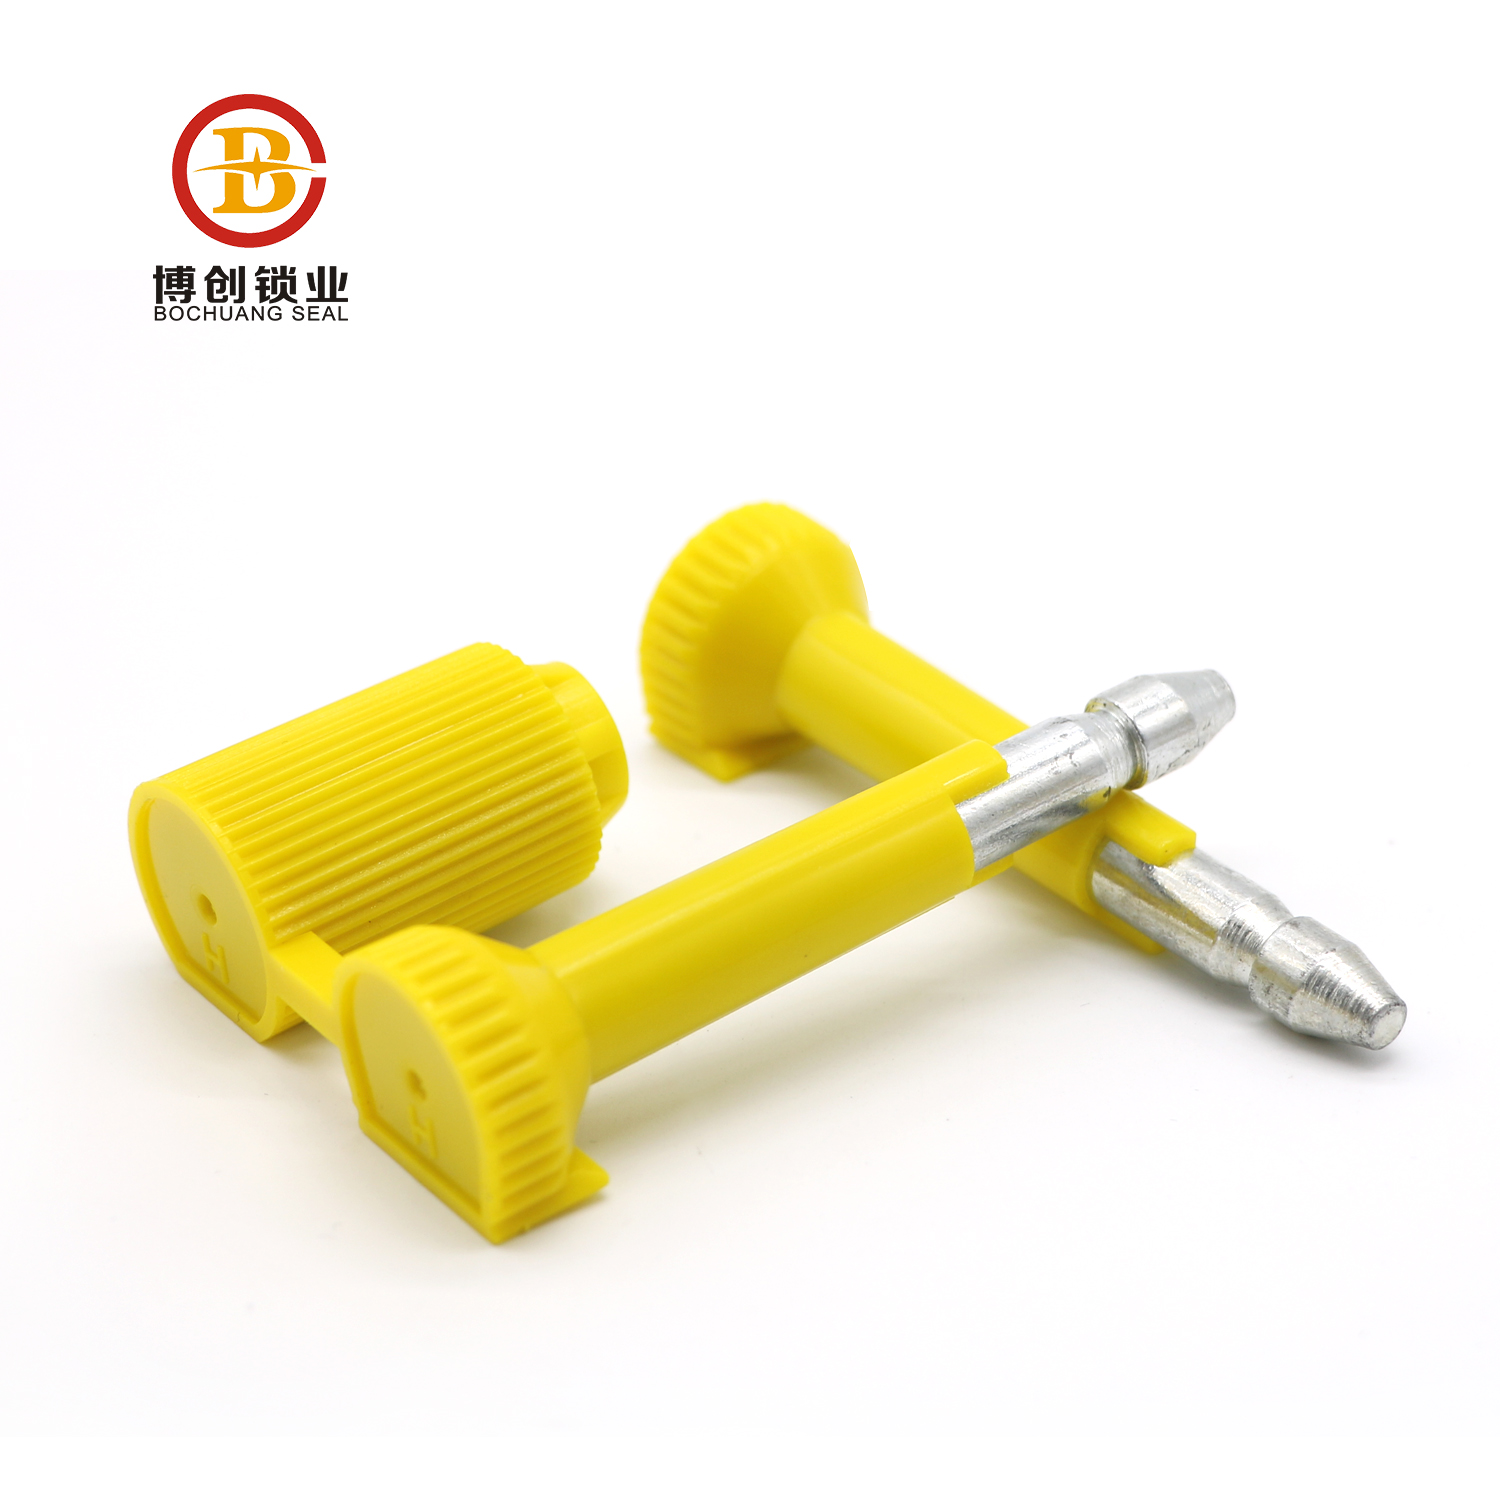 China competitive price and high quality security bolt seal online